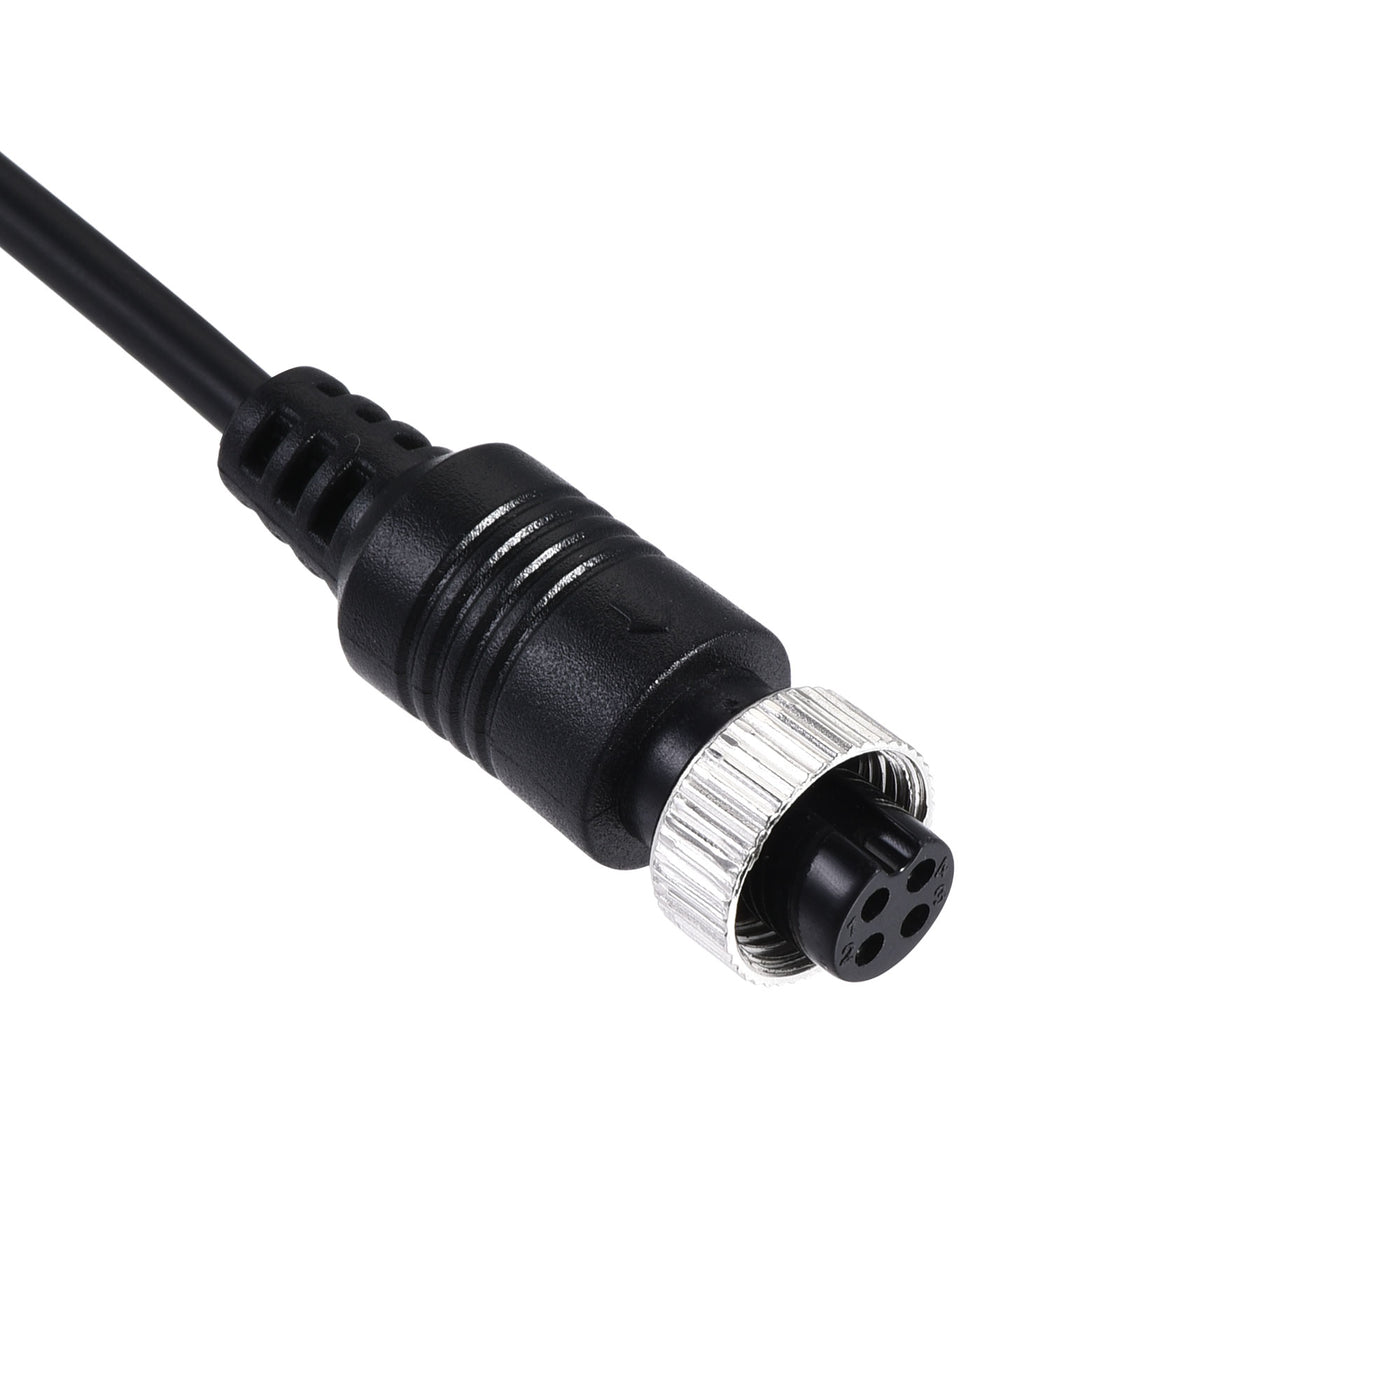 Uxcell Uxcell Video Aviation Cable 4-Pin 6.56FT 2M Male to Female Extension Cable